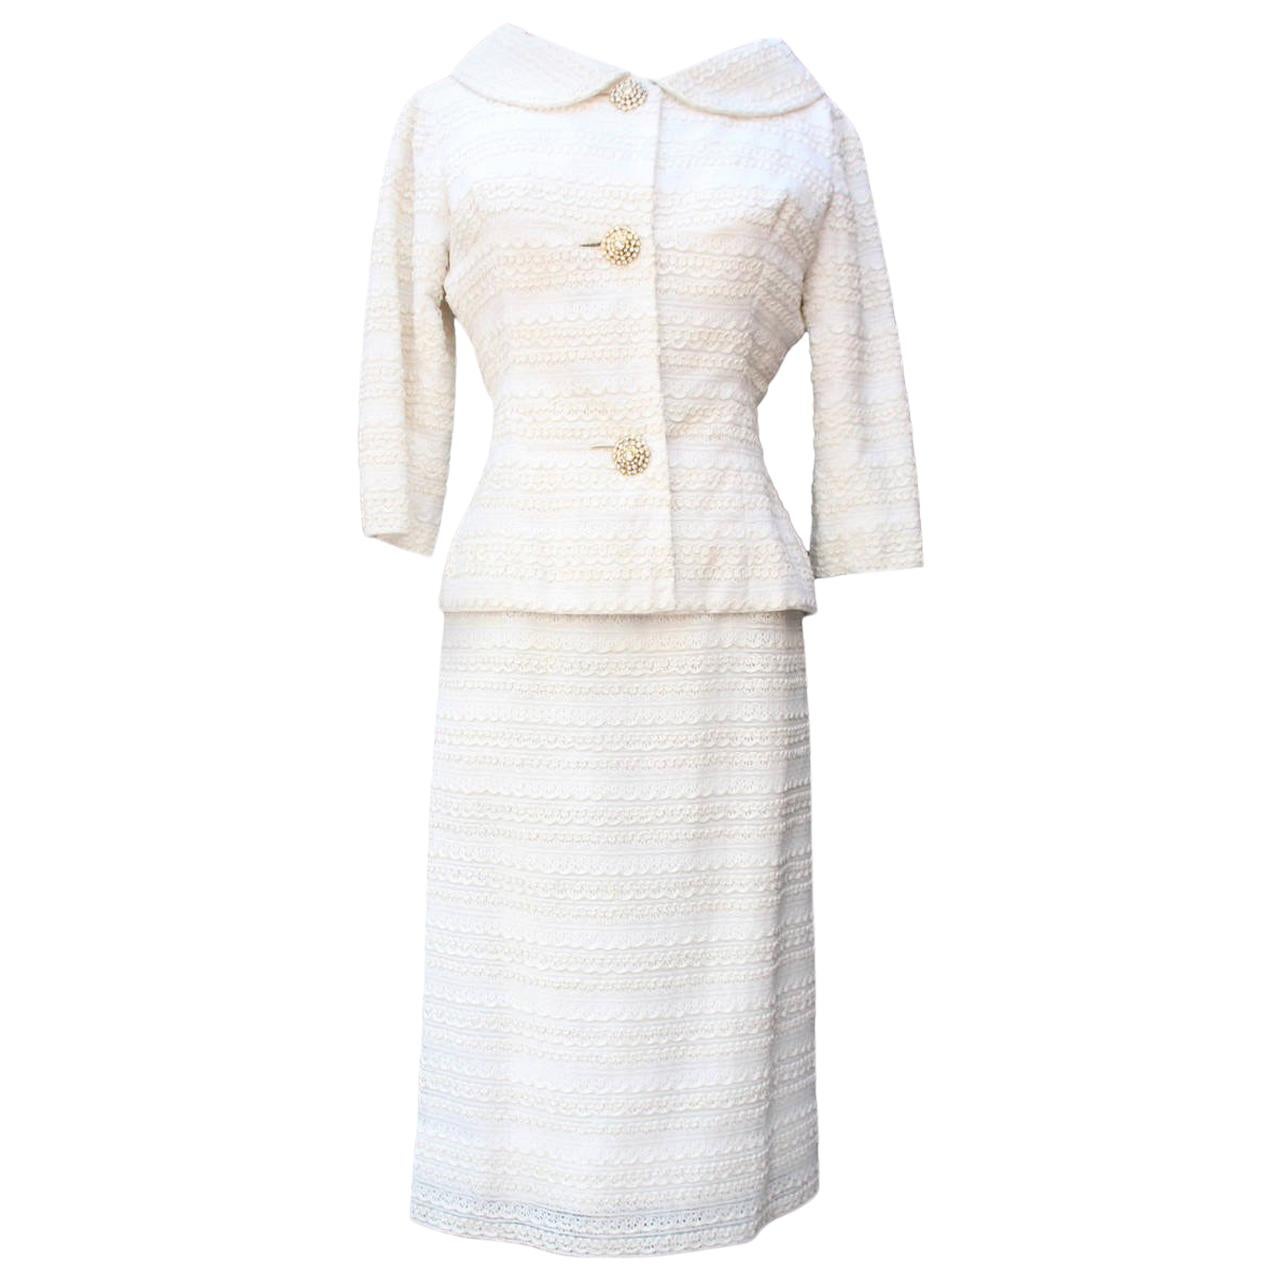 1961 Carven Haute Couture White Lace Dress and Jacket Ensemble im Angebot